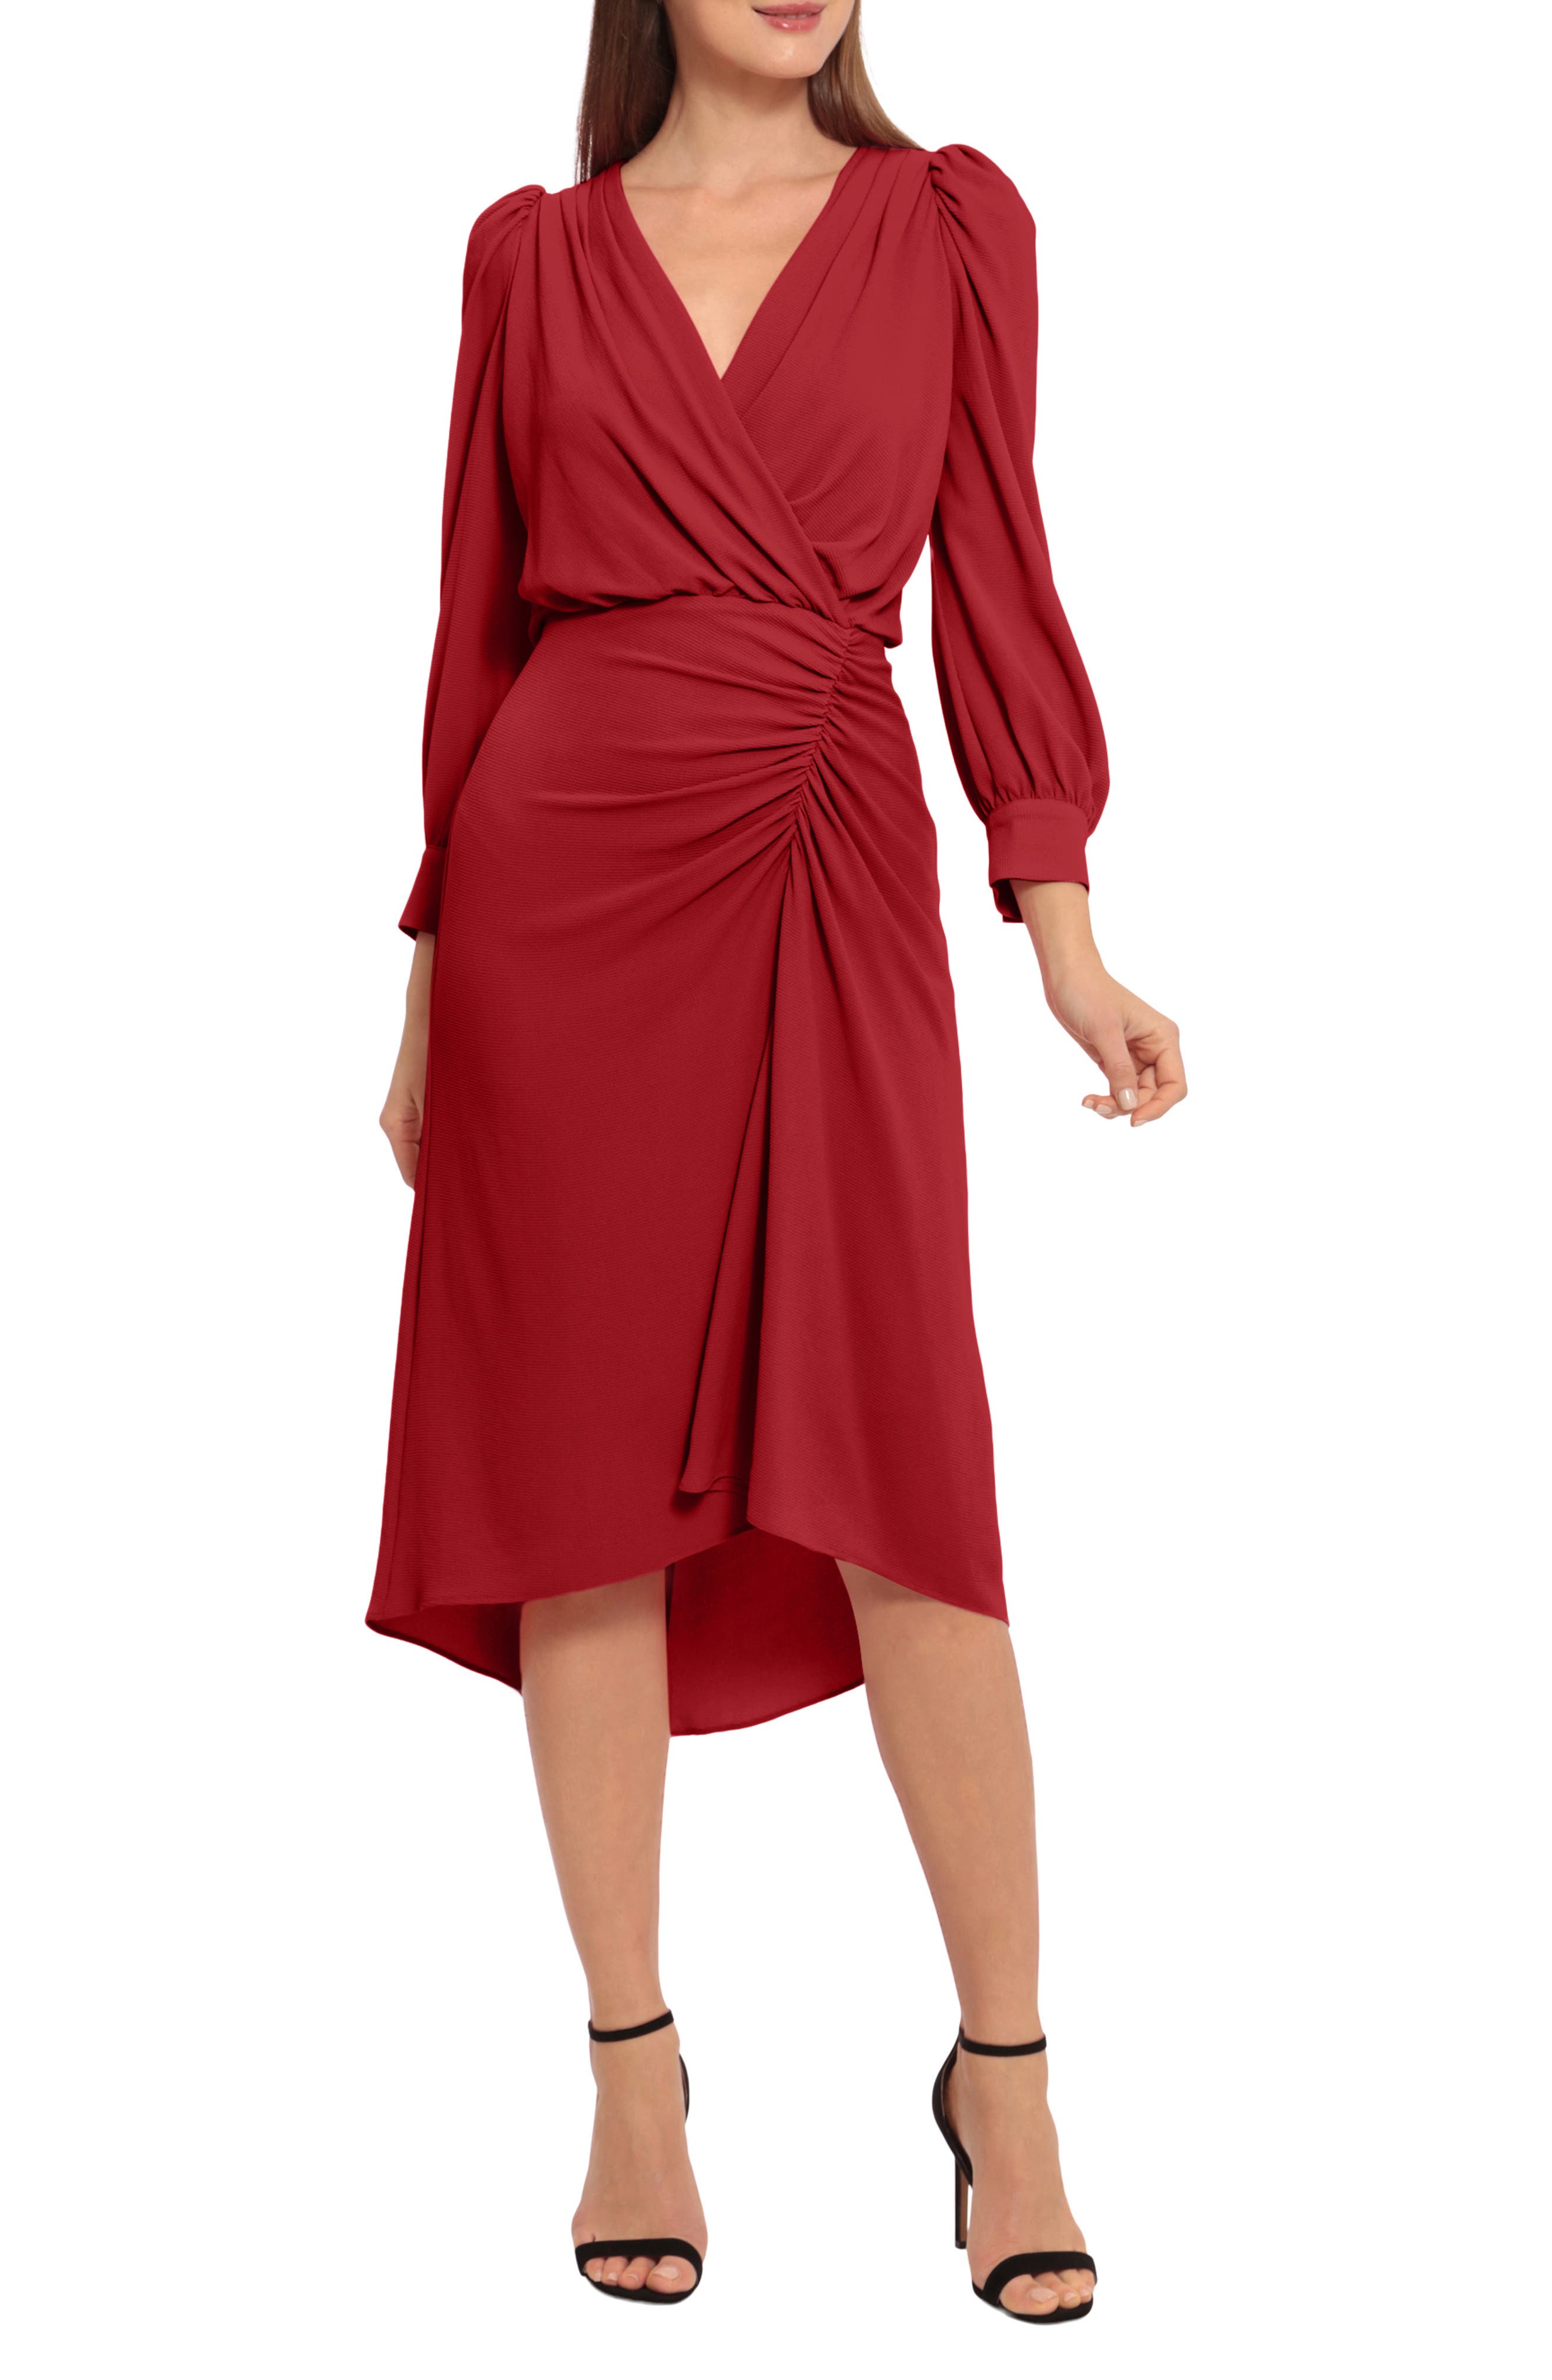 Indian Summers Inspired Clothing Maggy London Ruched Long Sleeve High-Low Midi Dress in Equestrian Red at Nordstrom Rack Size 14 $79.97 AT vintagedancer.com